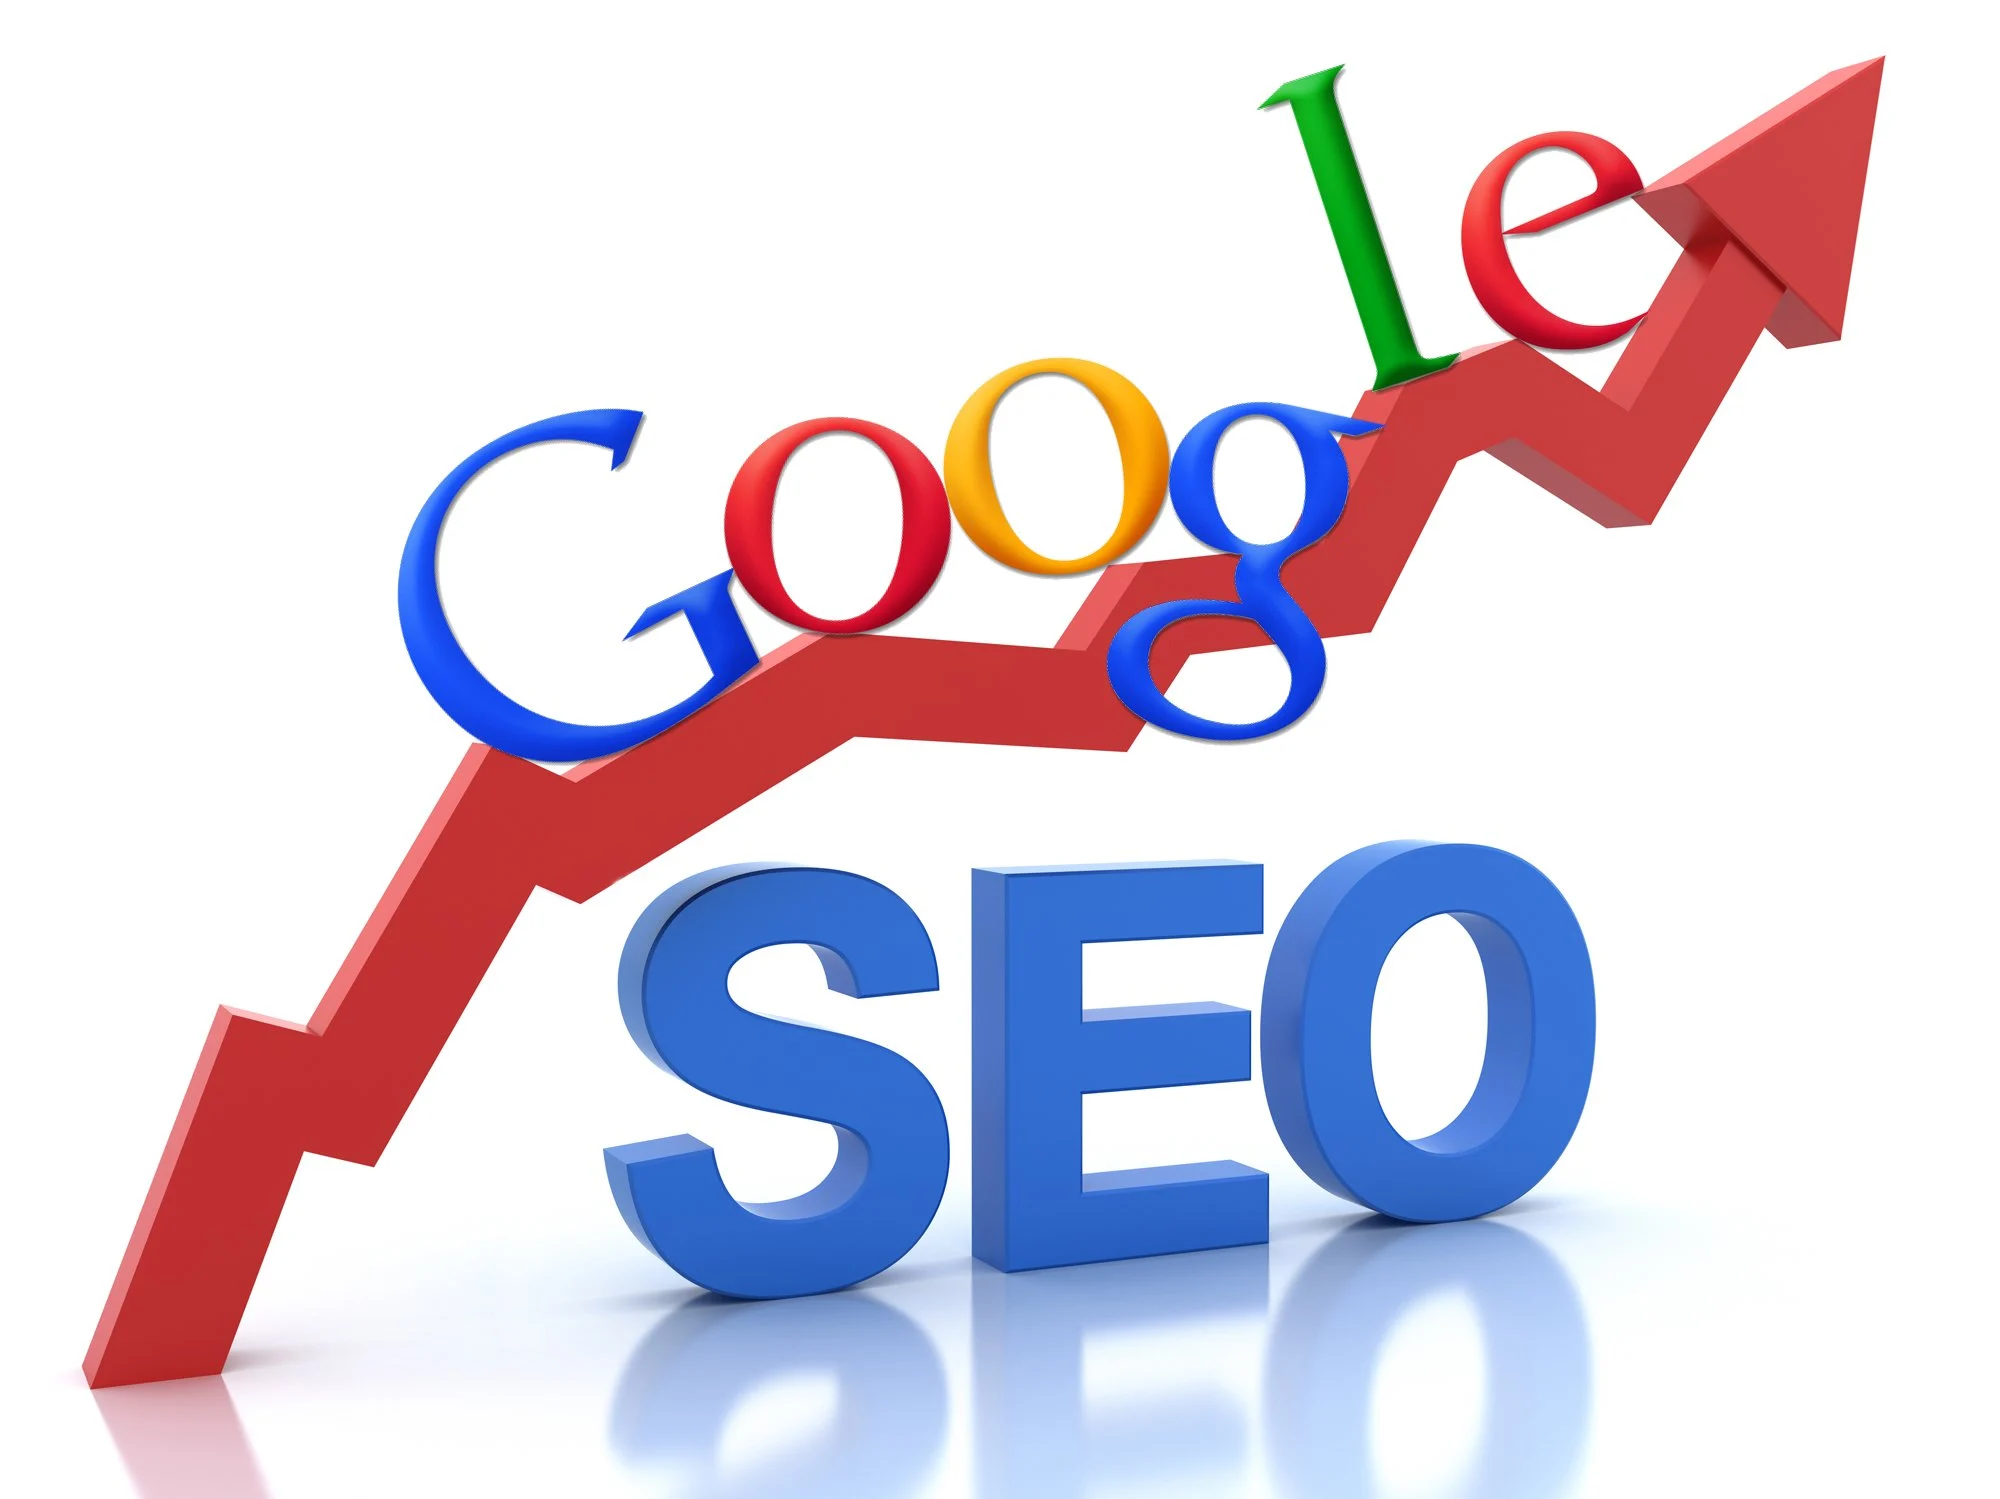 Need A Website? Websites with SEO $1500.